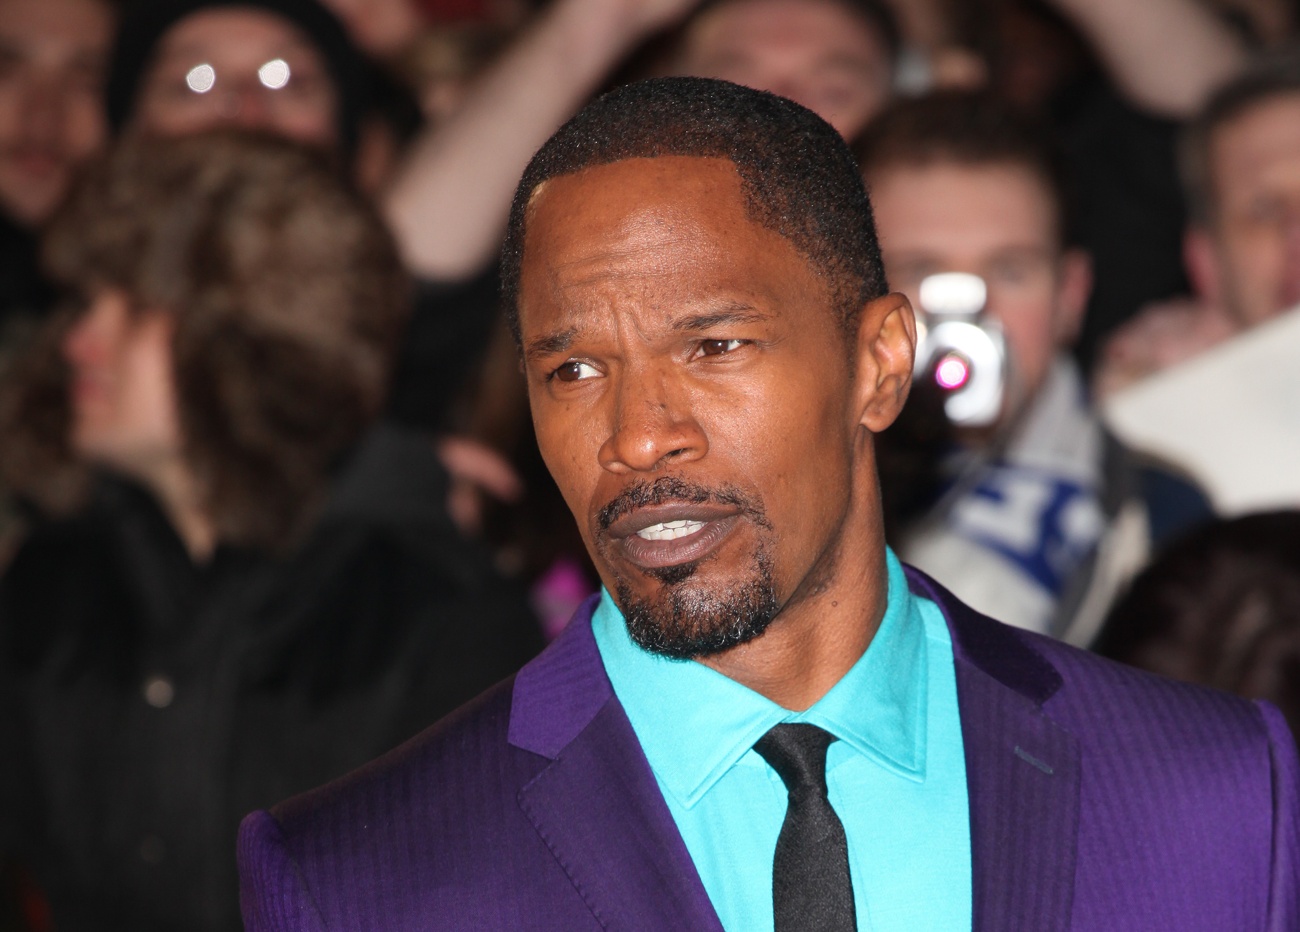 Jamie Foxx was not admitted to COVID post-vaccine hospital, his rep confirms it